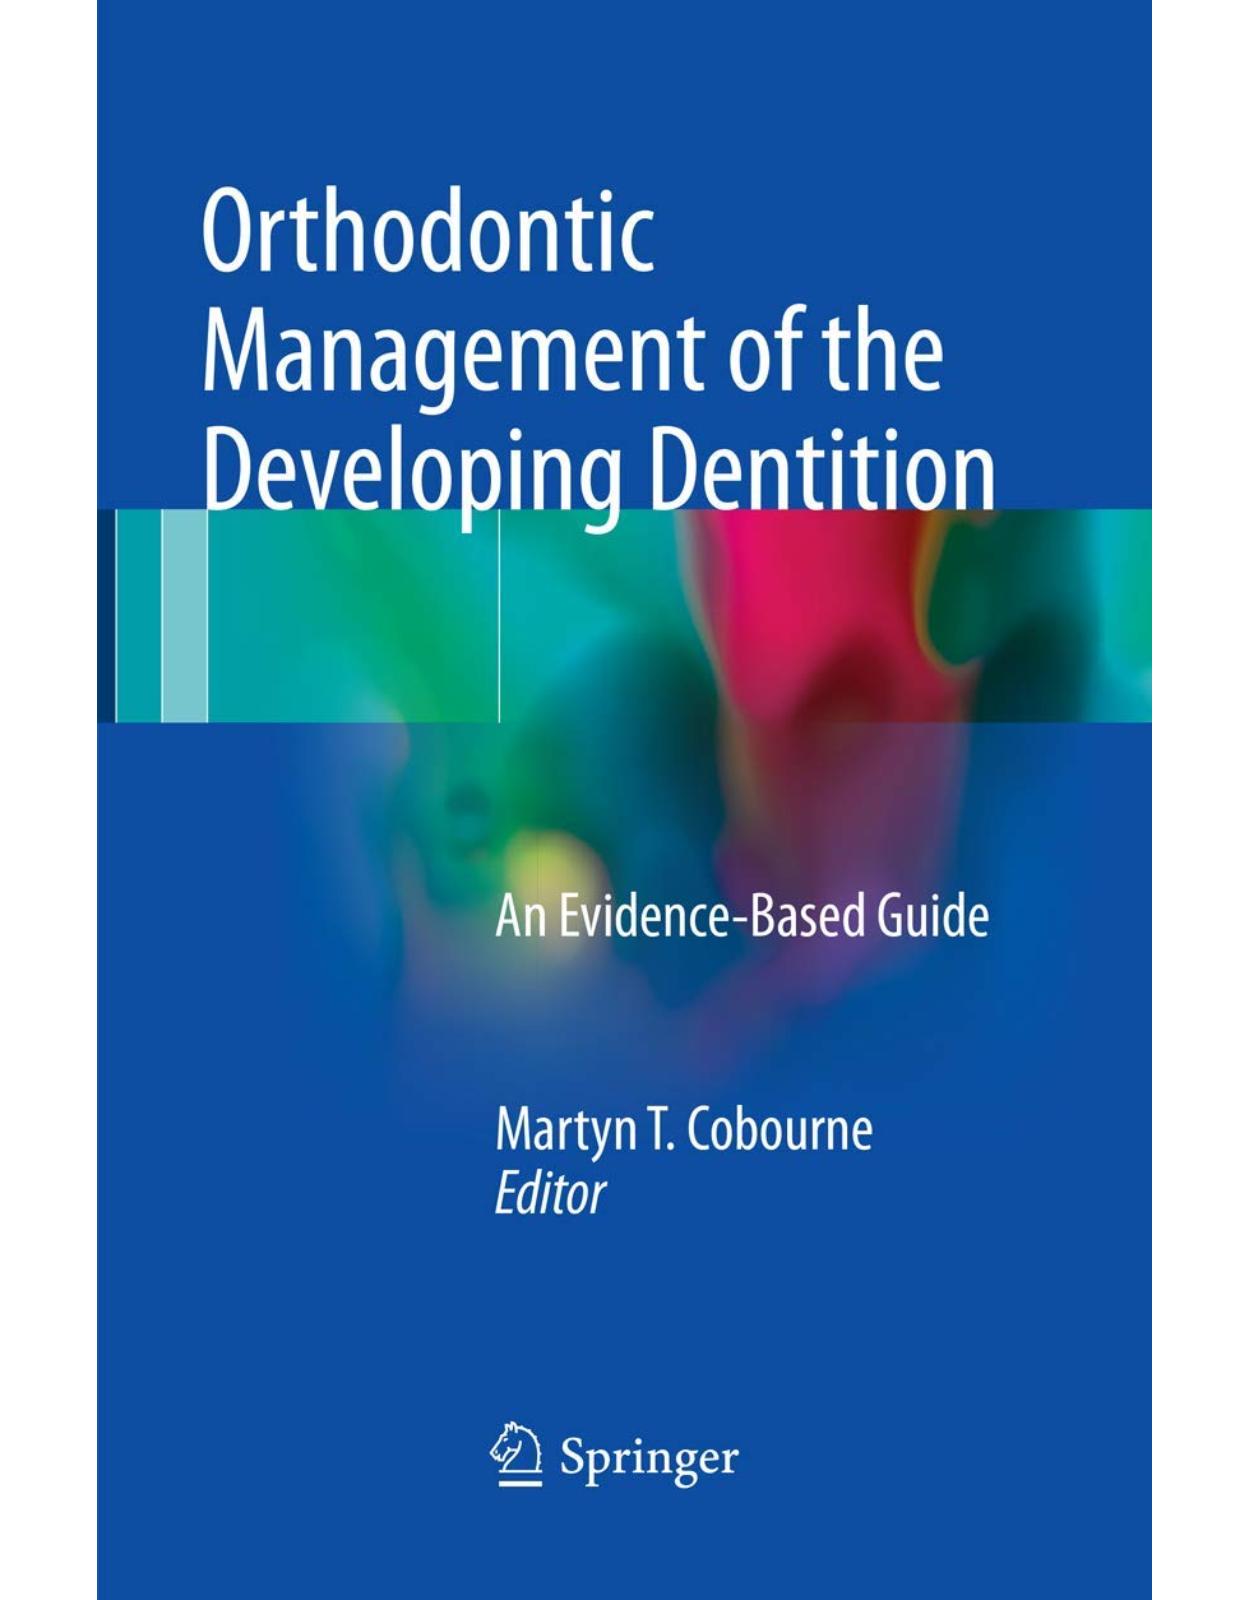 Orthodontic Management of the Developing Dentition: An Evidence-Based Guide 